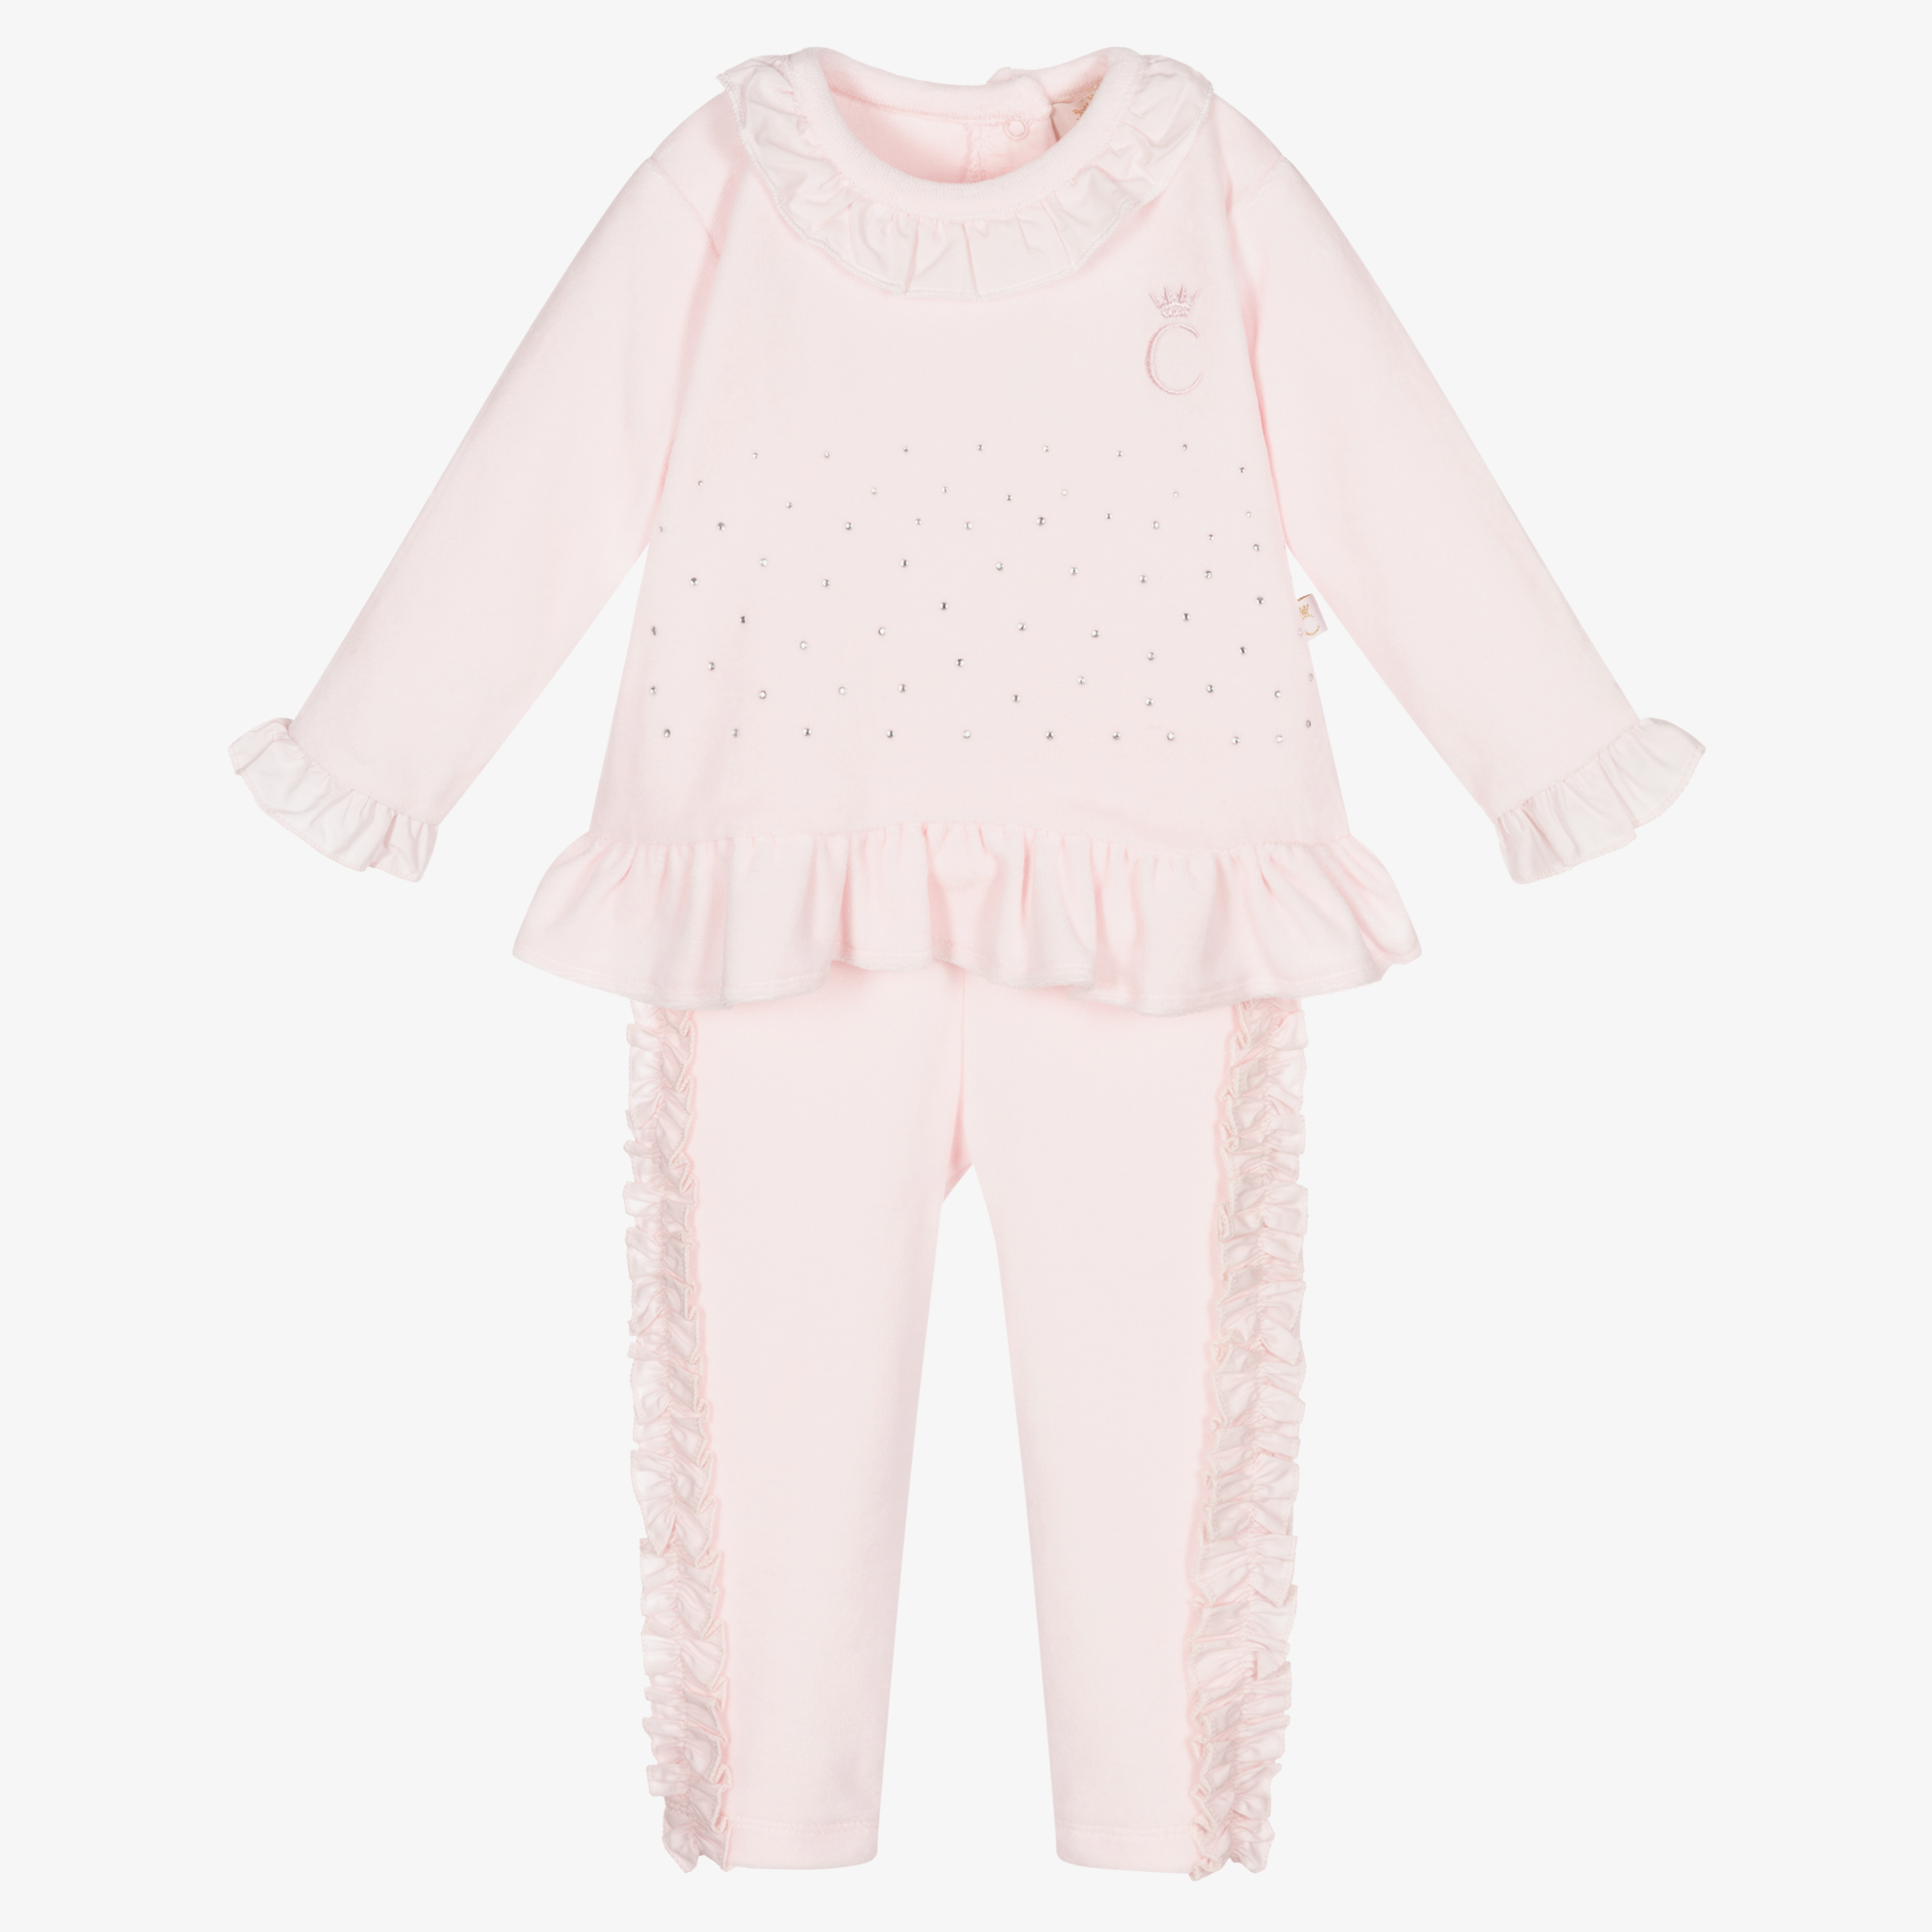 Caramelo Kids Girls Pink Cotton Lace Frilly Pants